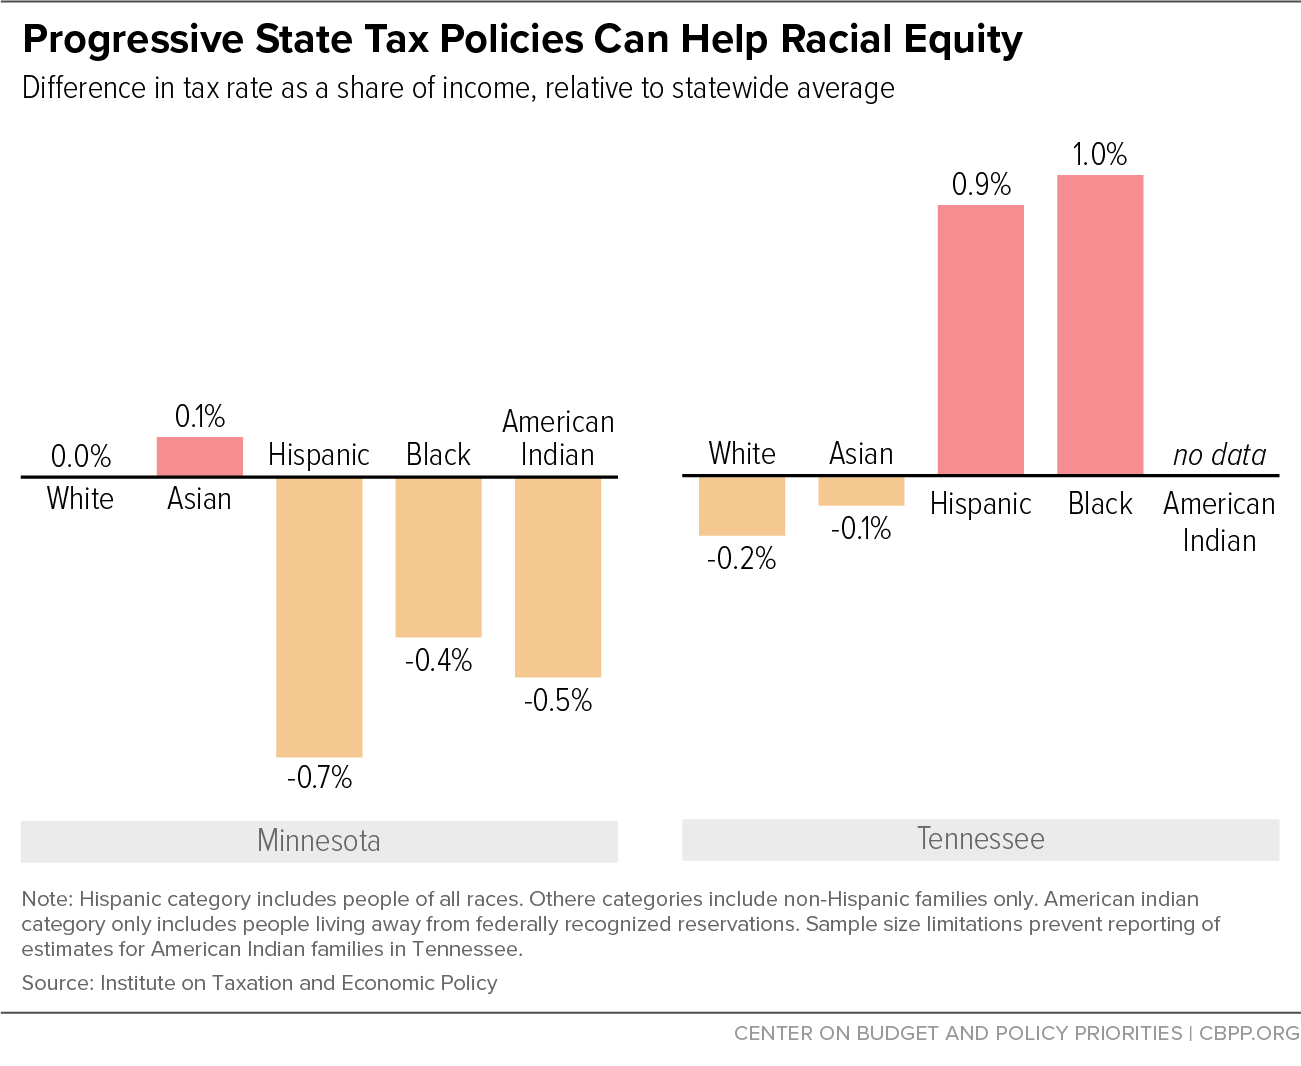 Progressive State Tax Policies Can Help Racial Equity